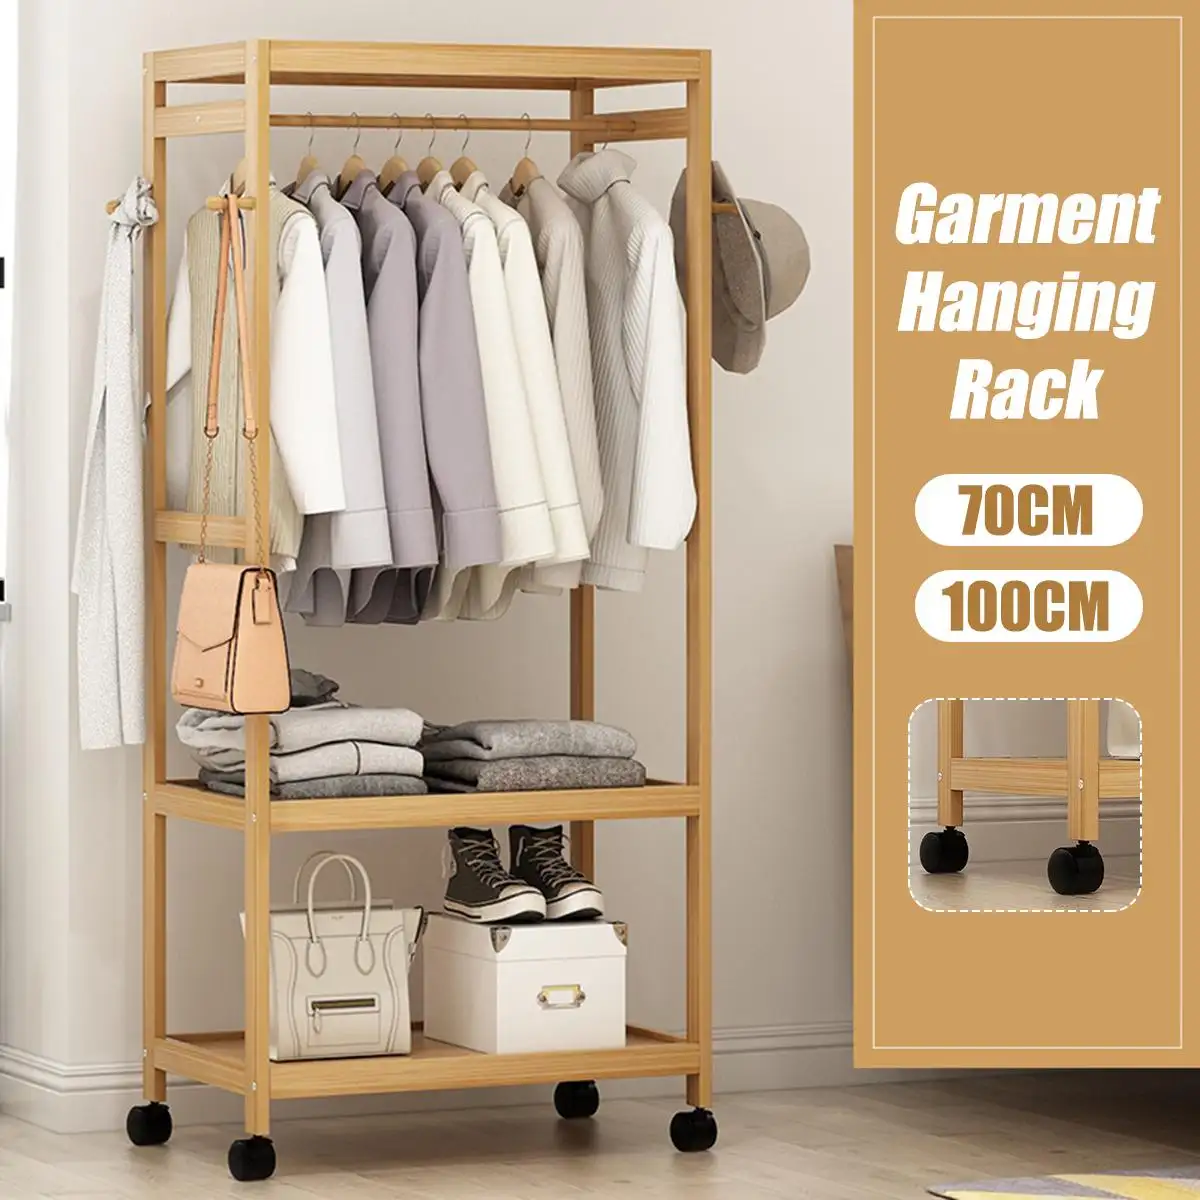 US 70CM Rolling Bamboo Garment Clothes Holder Hanging Rack Shelf with